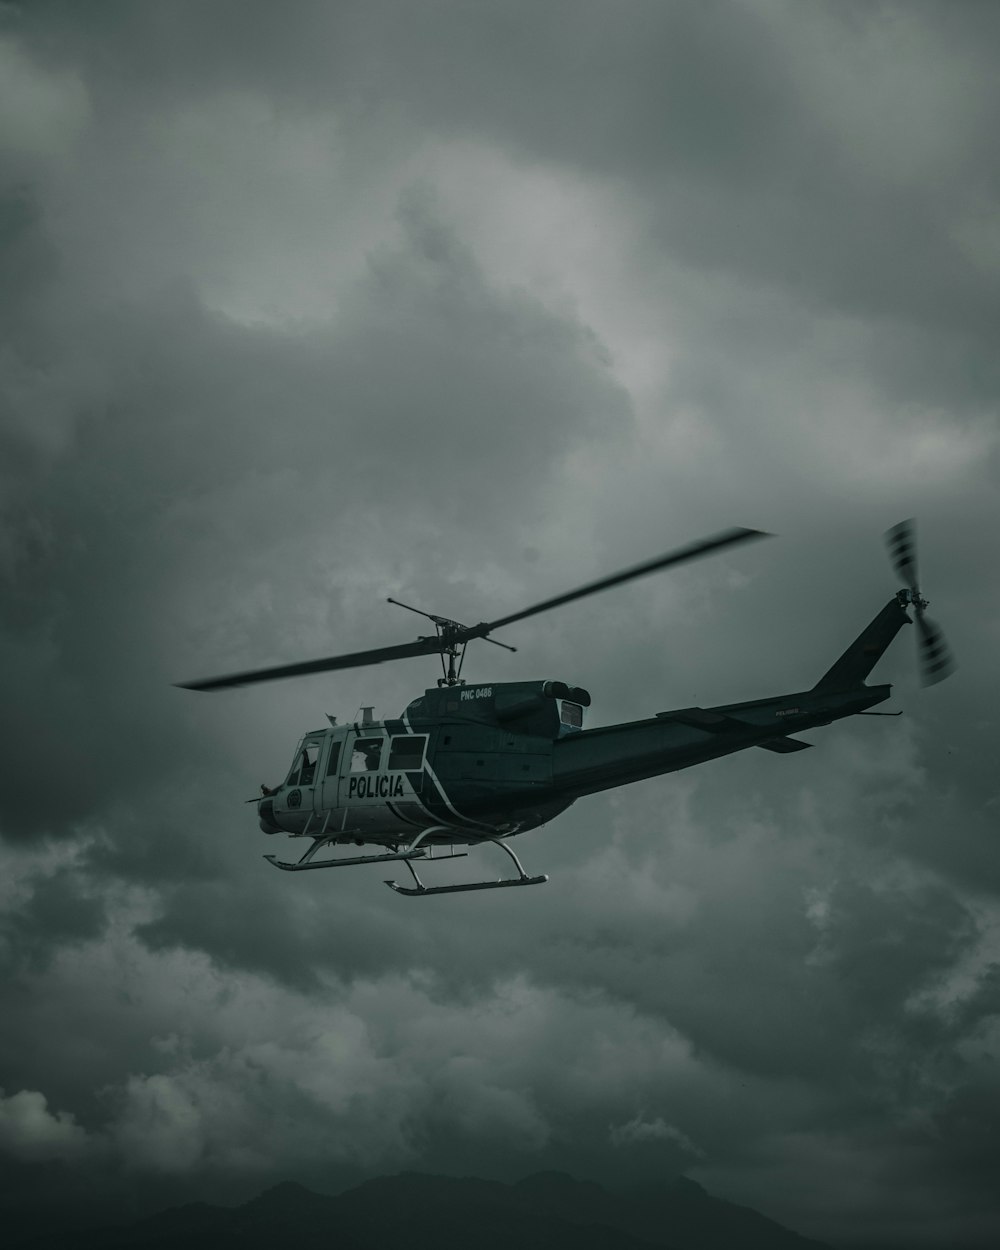 green and black helicopter flying under white clouds during daytime